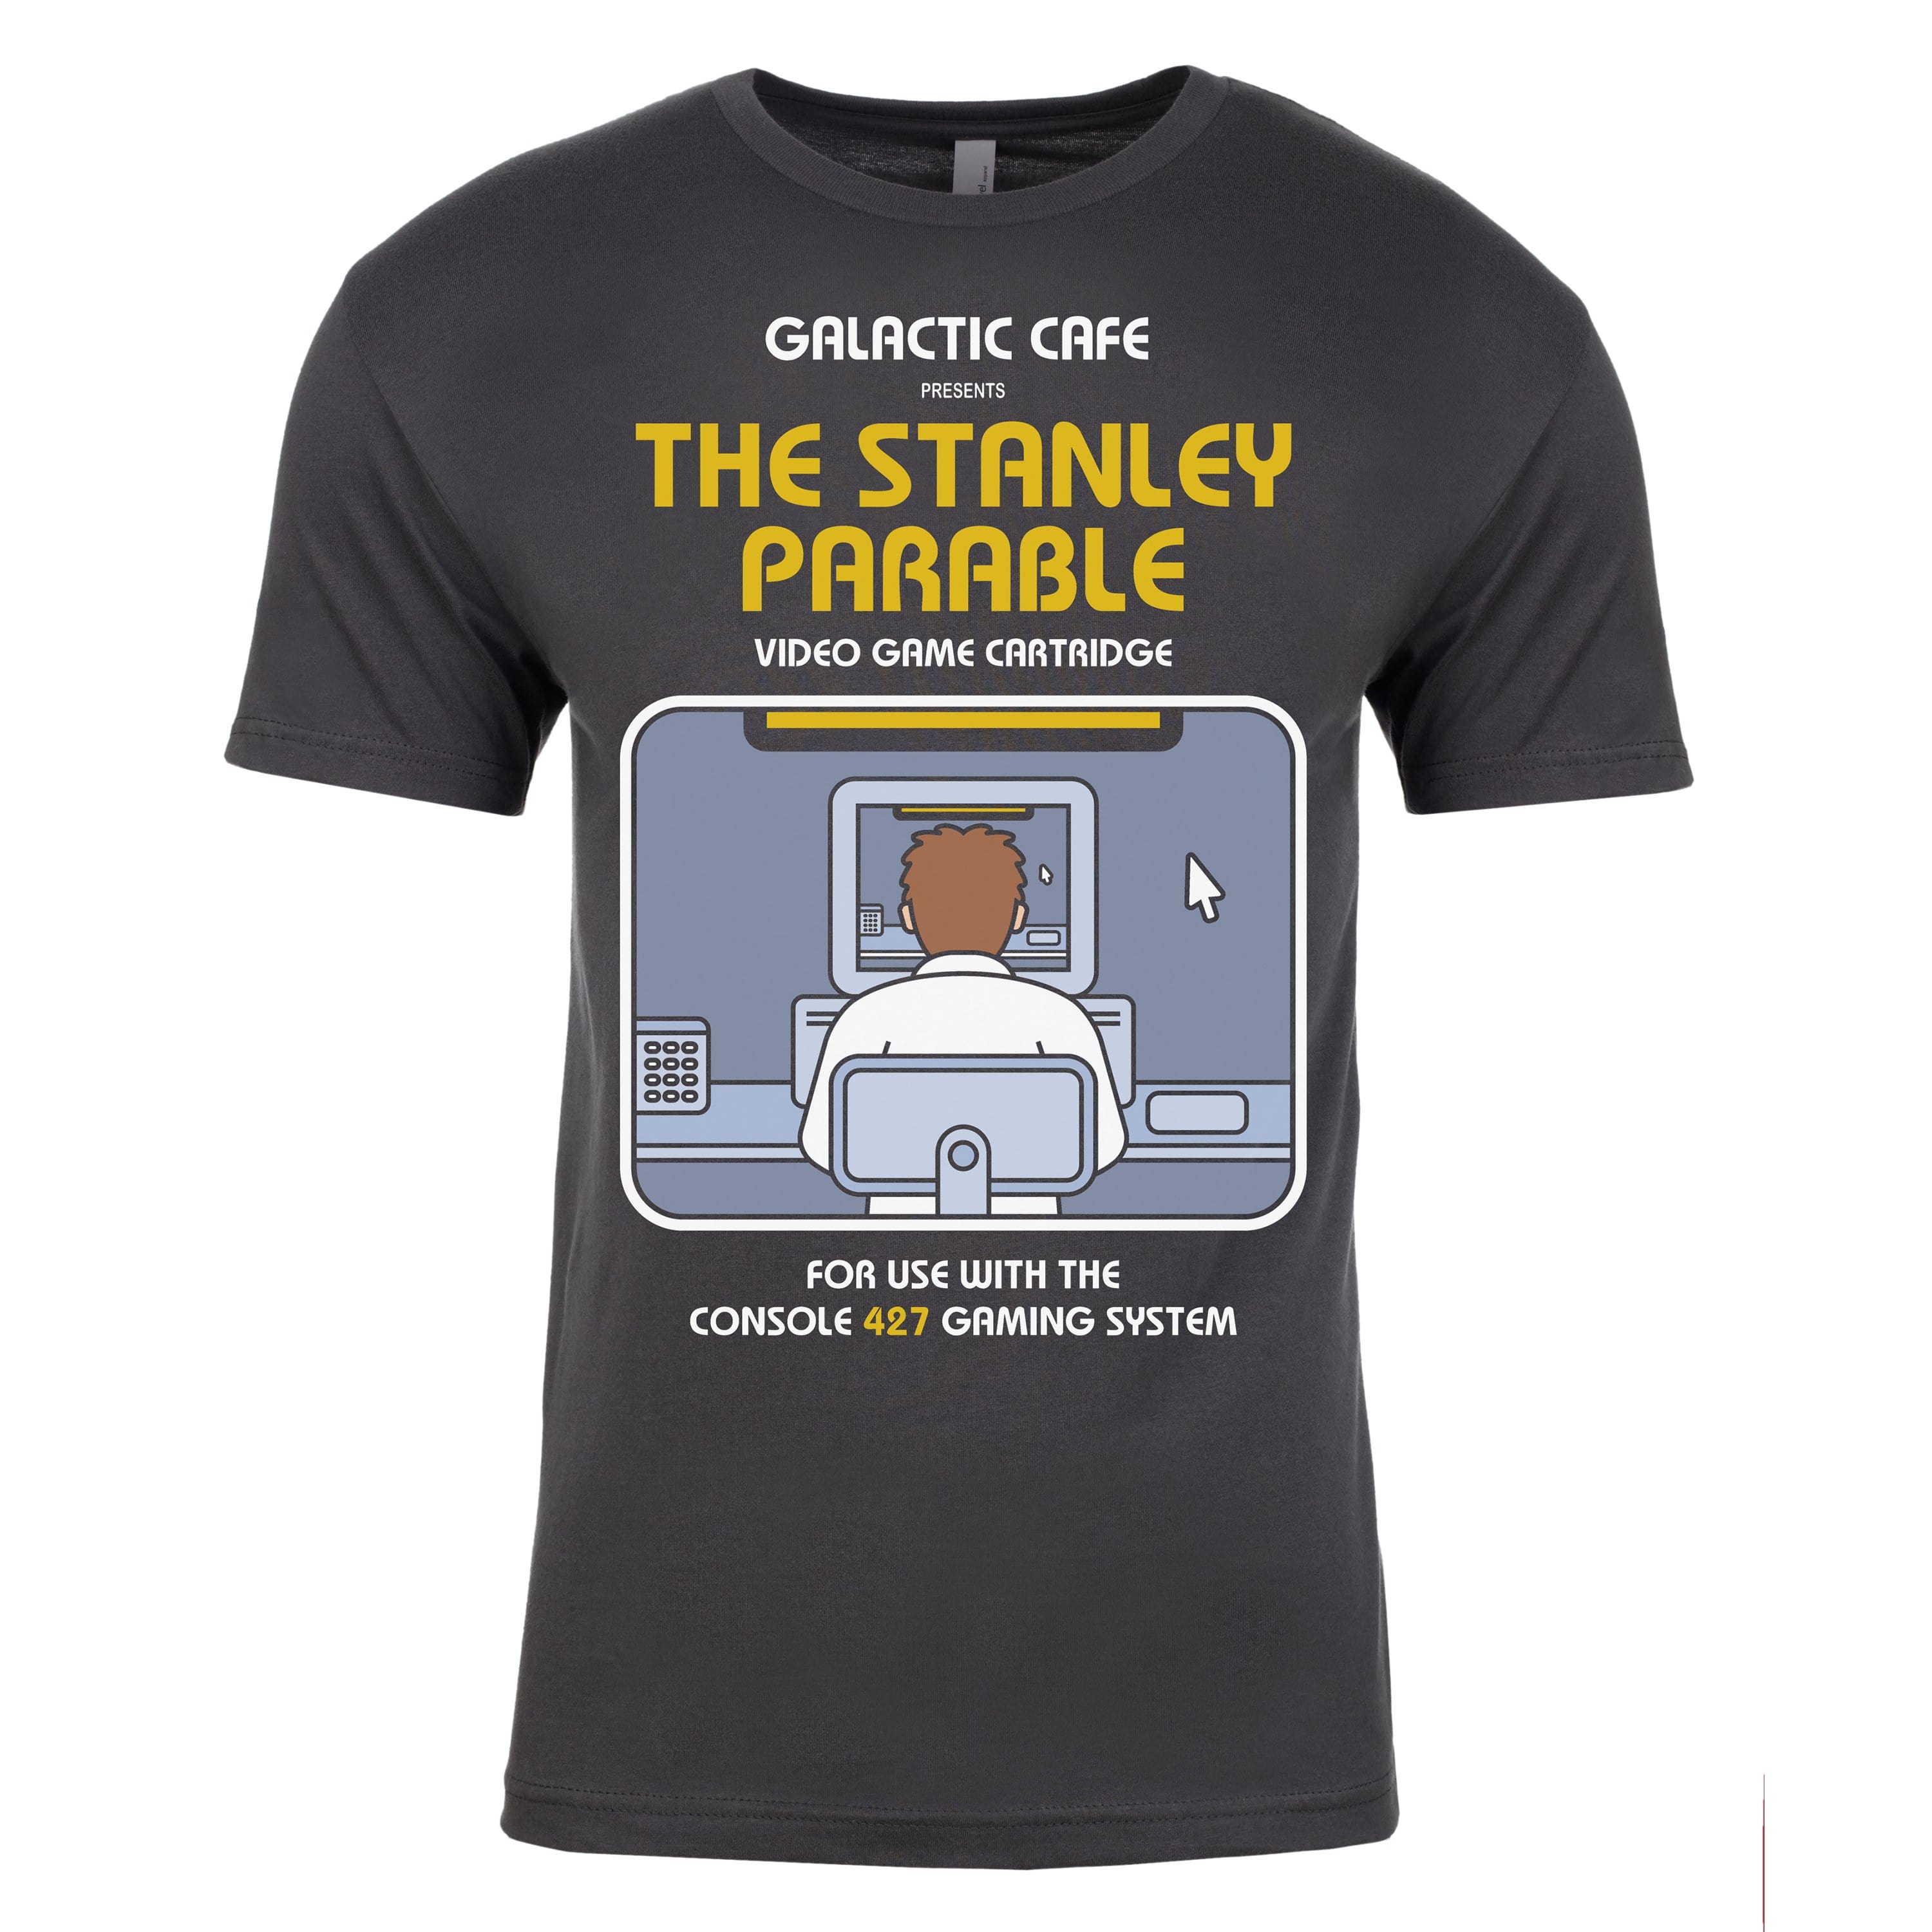 The Stanley Parable - Retro Tee